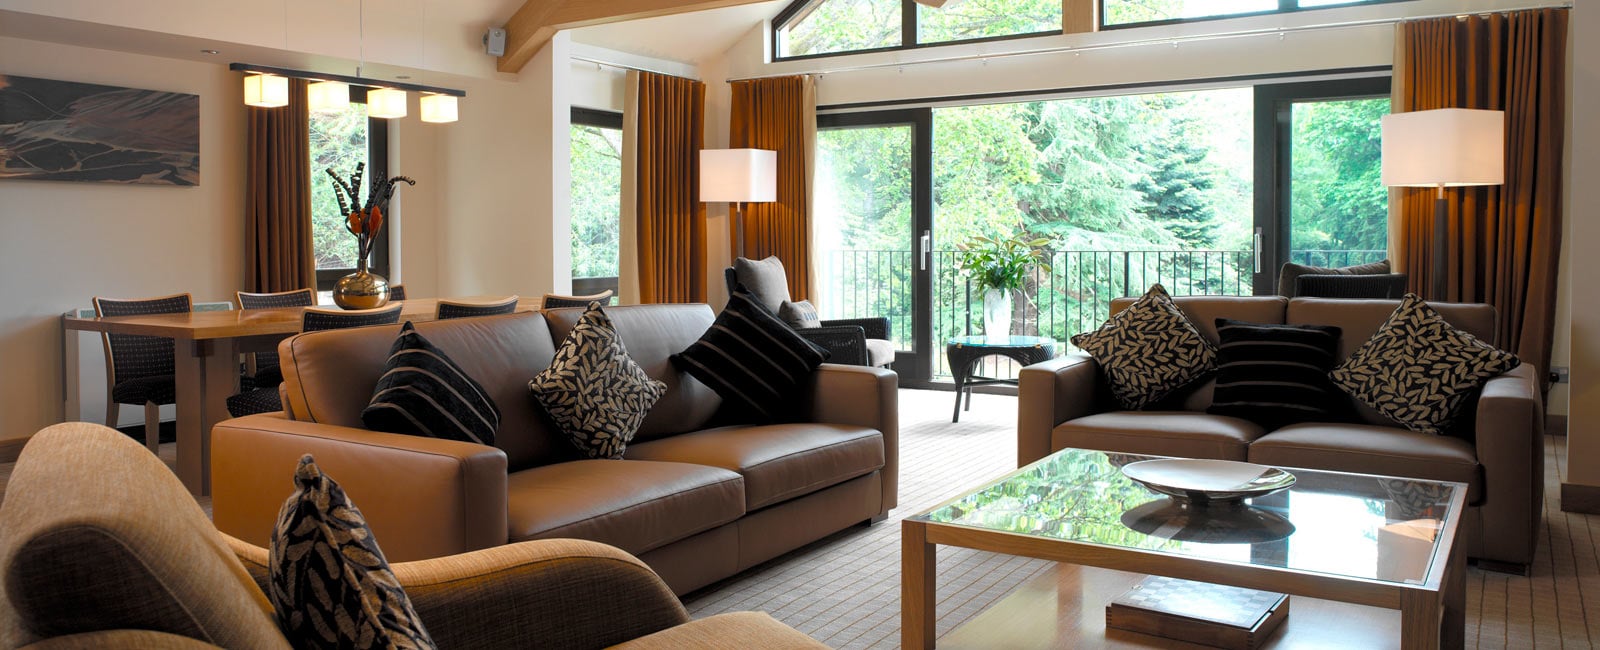 Living Area at Dunkeld House Lodges, Managed by Hilton Grand Vacations in Perthshire, Scotland